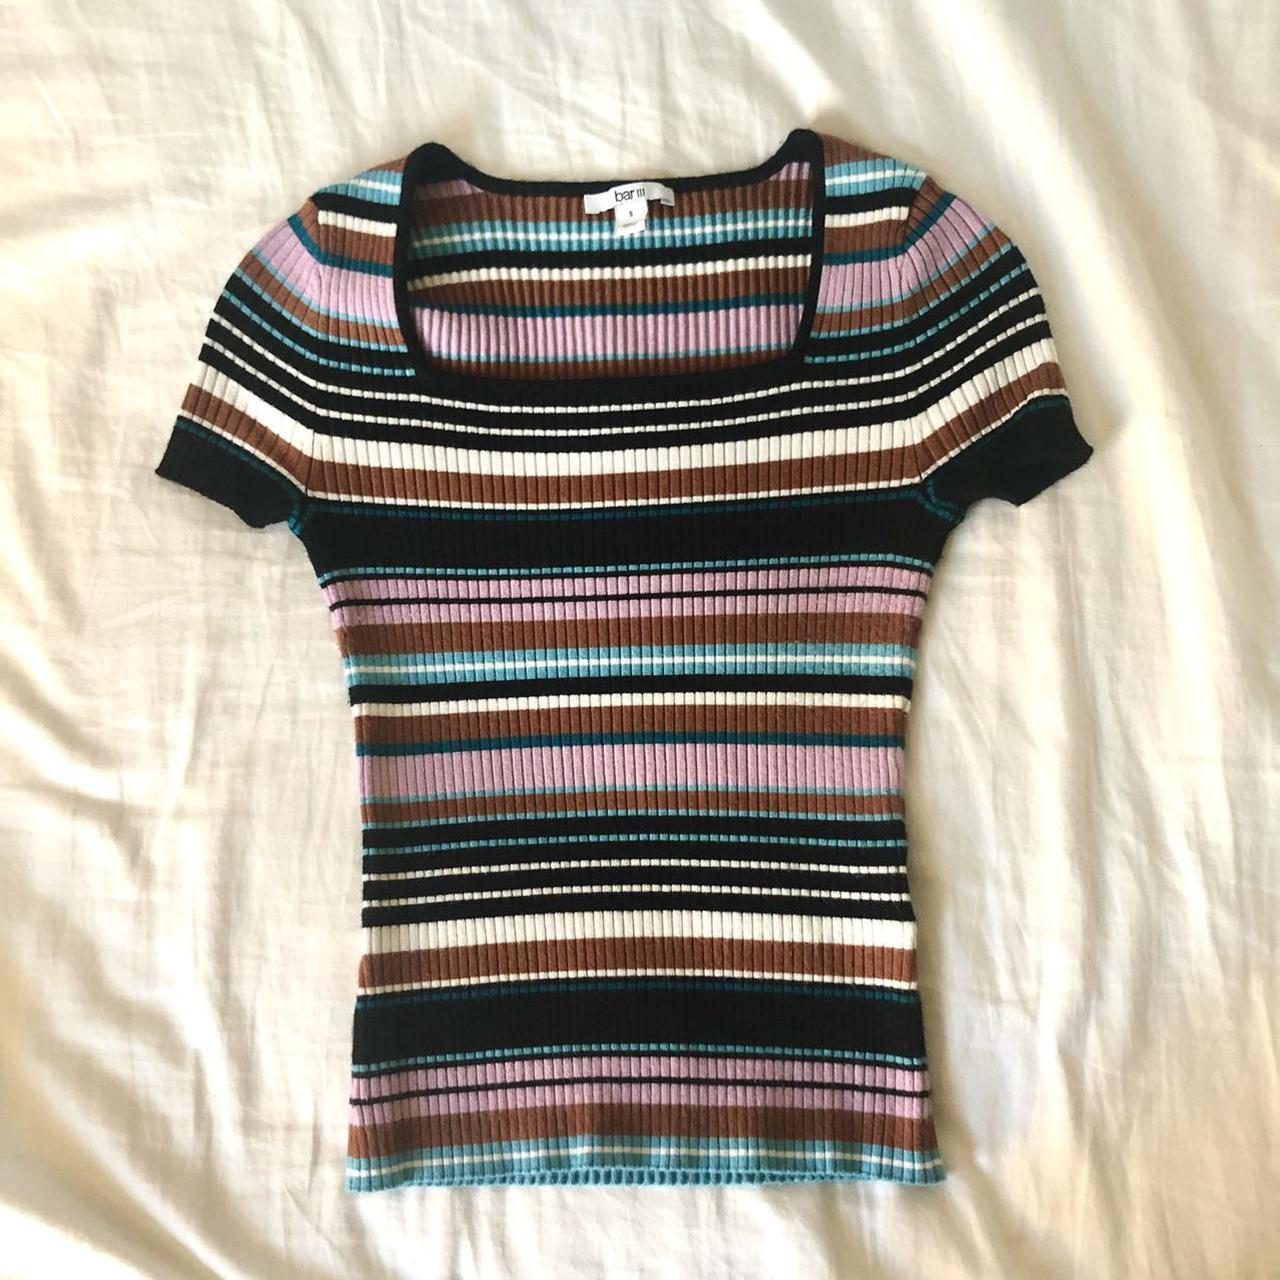 Product Image 1 - striped ribbed knit tshirt
~the pictures